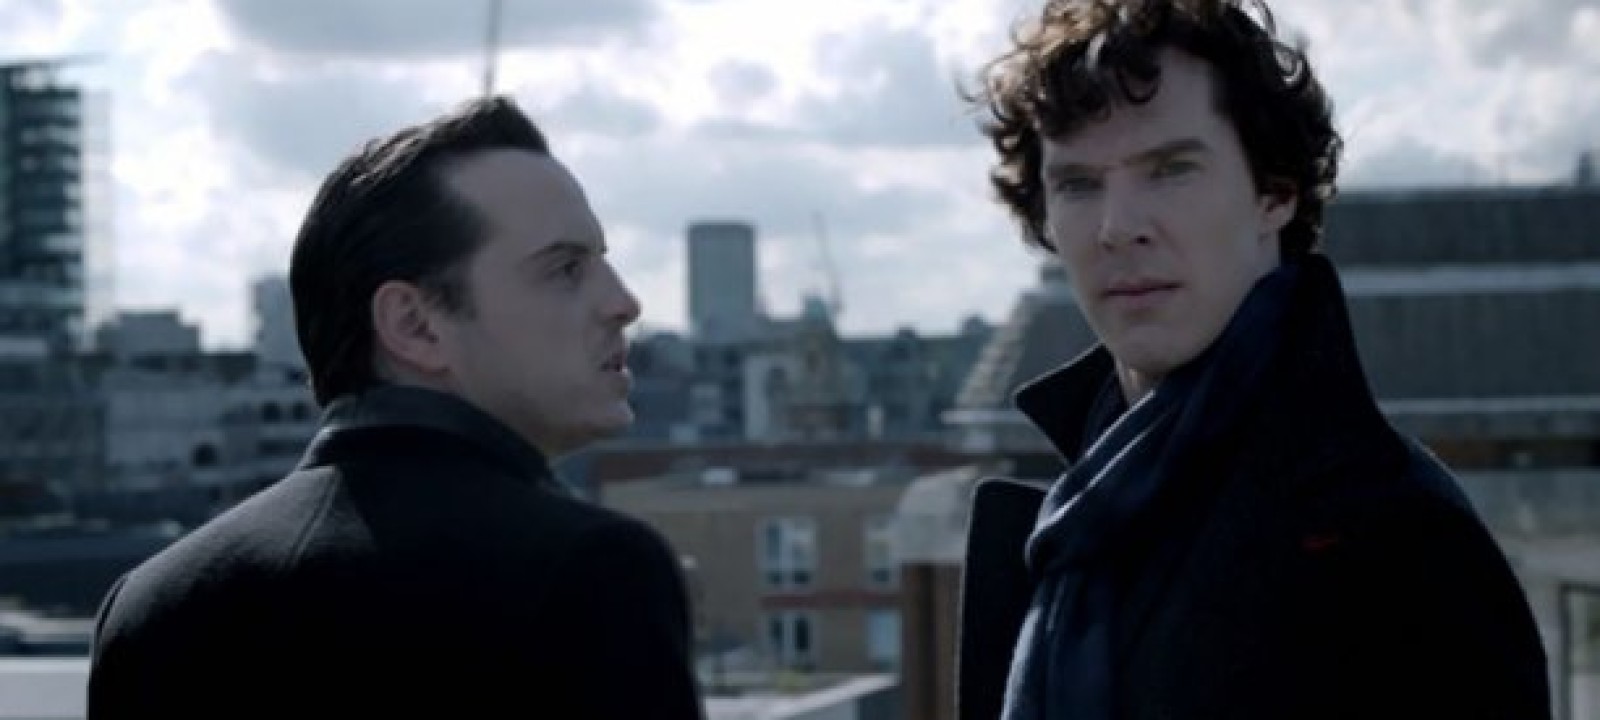 Moriarty as a Trickster